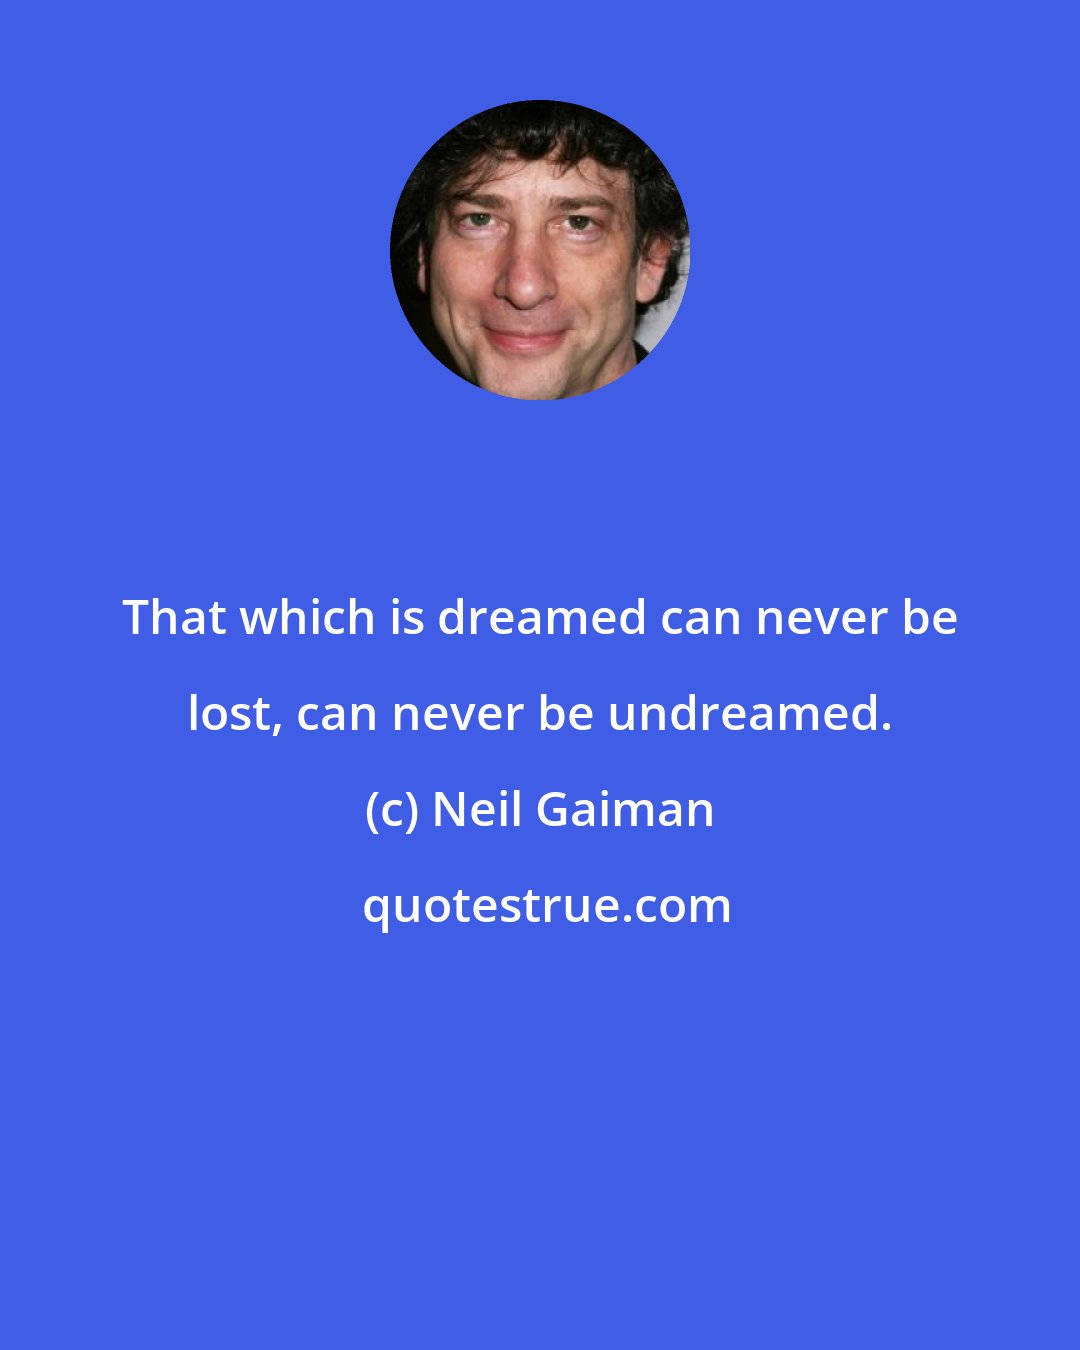 Neil Gaiman: That which is dreamed can never be lost, can never be undreamed.